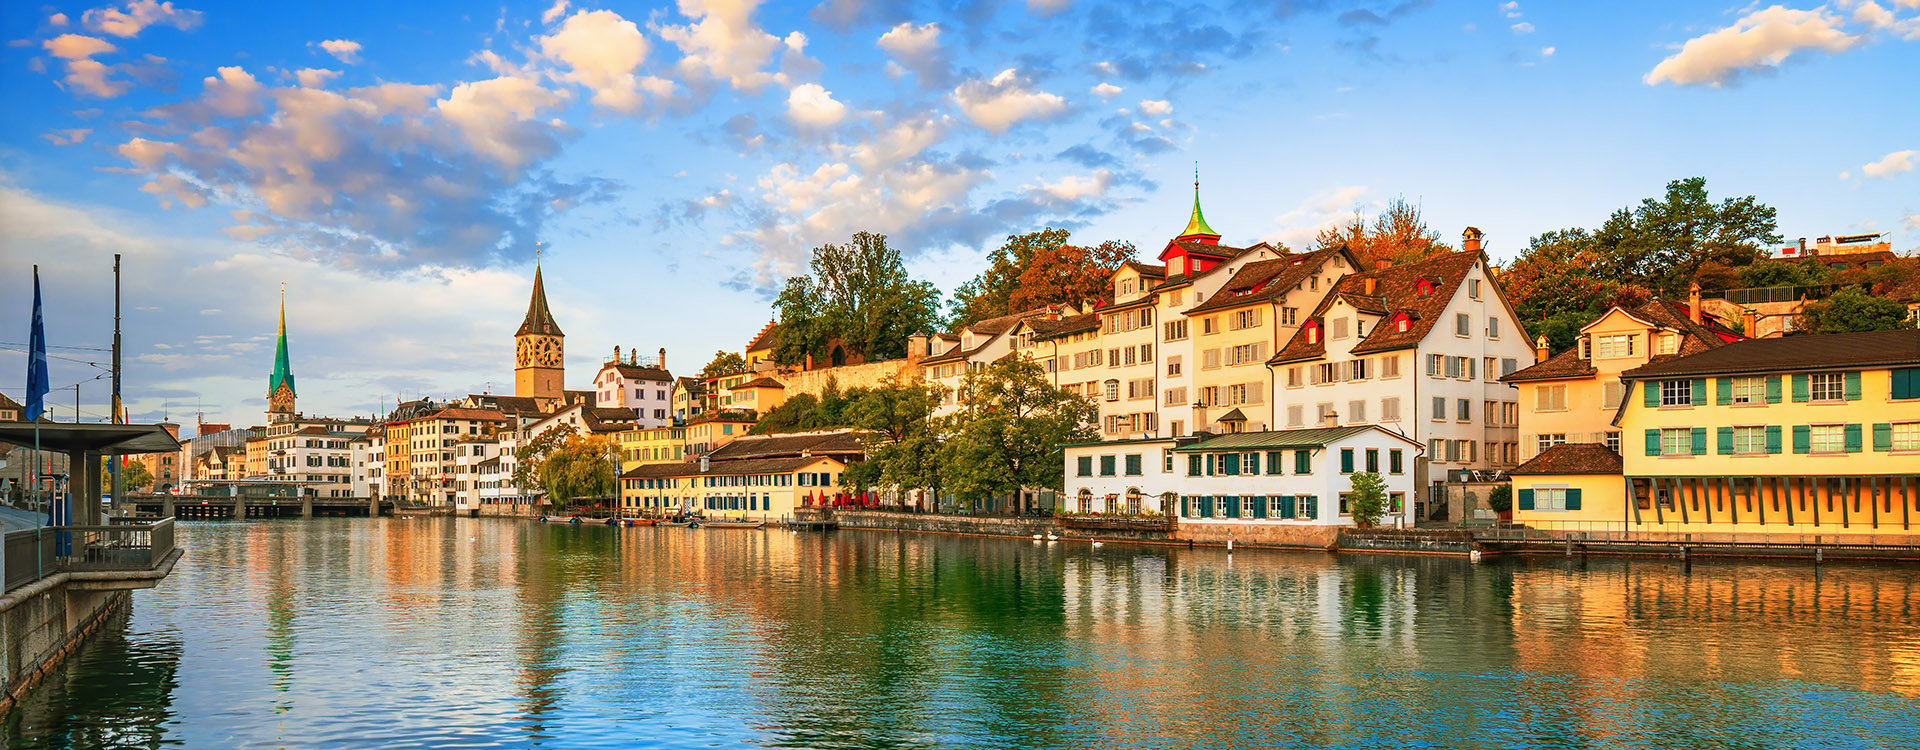 Historic Zurich city center with famous Fraumunster and Grossmunster Churches and river Limmat at Lake Zurich on a sunny day with clouds in summer, Canton of Zurich, Switzerland